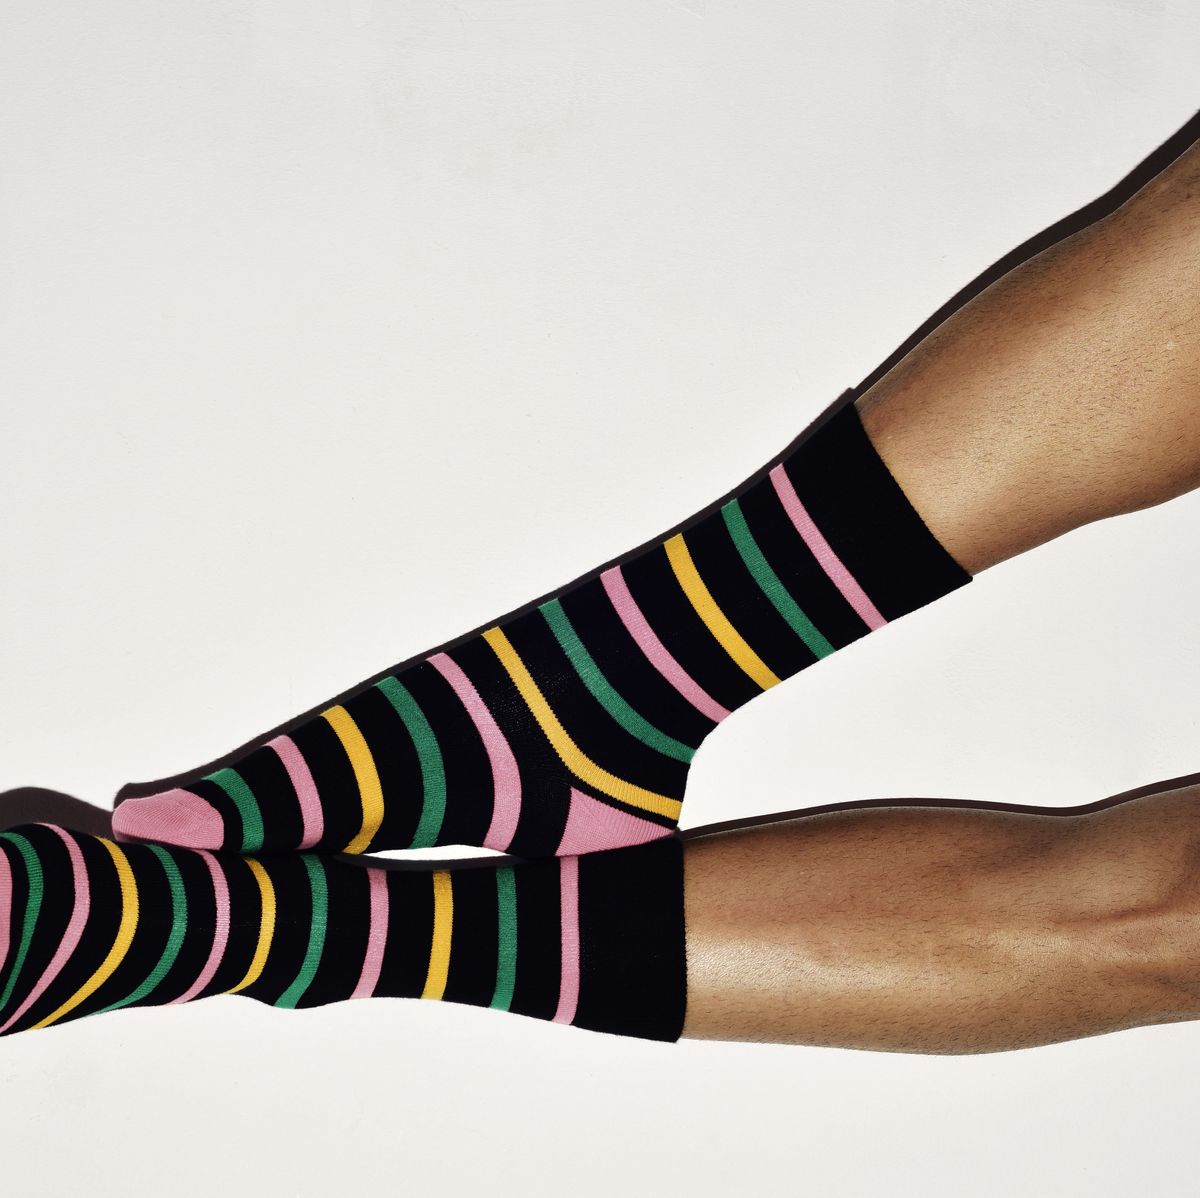 Sexy Penis Sock - Sex With Socks On Benefits - Why Do Men Wear Socks During Sex?